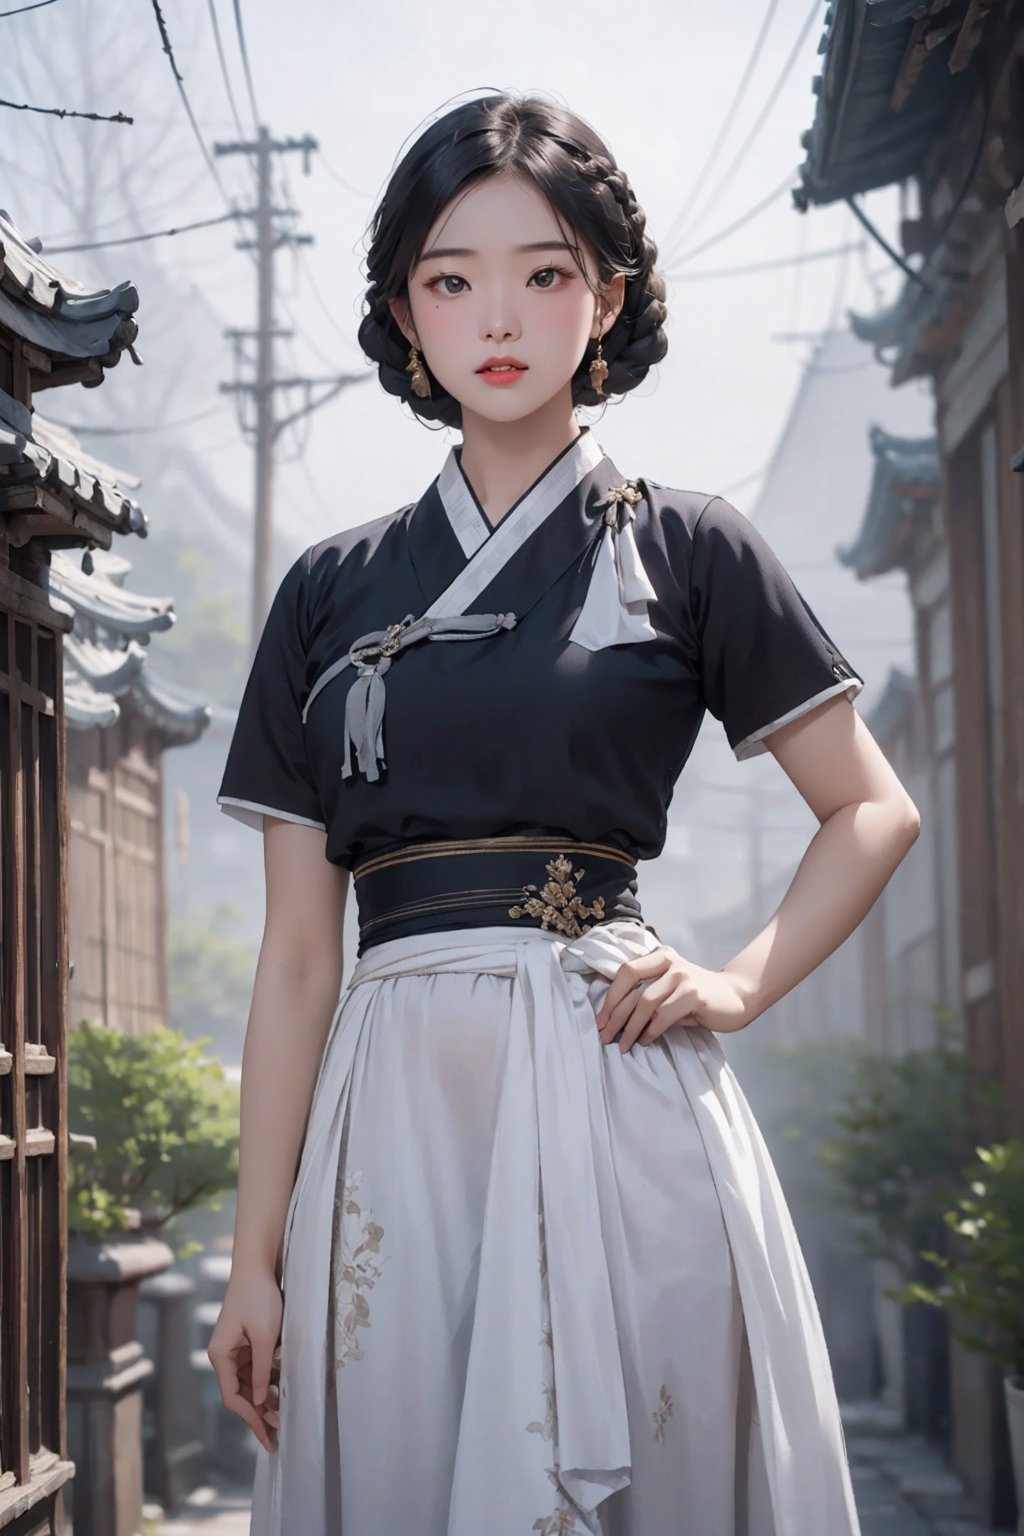 ((((1 young girl, An strong impression 18-Year-Old Korean female student at 1920s)))), (Black Hair, braided hair back), (Dressed in white and black color Korean hanbok), (Foggy Seoul Streets at 1920s), (Dynamic Pose:1.4), Centered, (Waist-up Shot:1.4), From Front Shot, Insane Details, Intricate Face Detail, Intricate Hand Details, Cinematic Shot and Lighting, Realistic and Vibrant Colors, Masterpiece, Sharp Focus, Ultra Detailed, Incredibly Realistic Environment and Scene, 